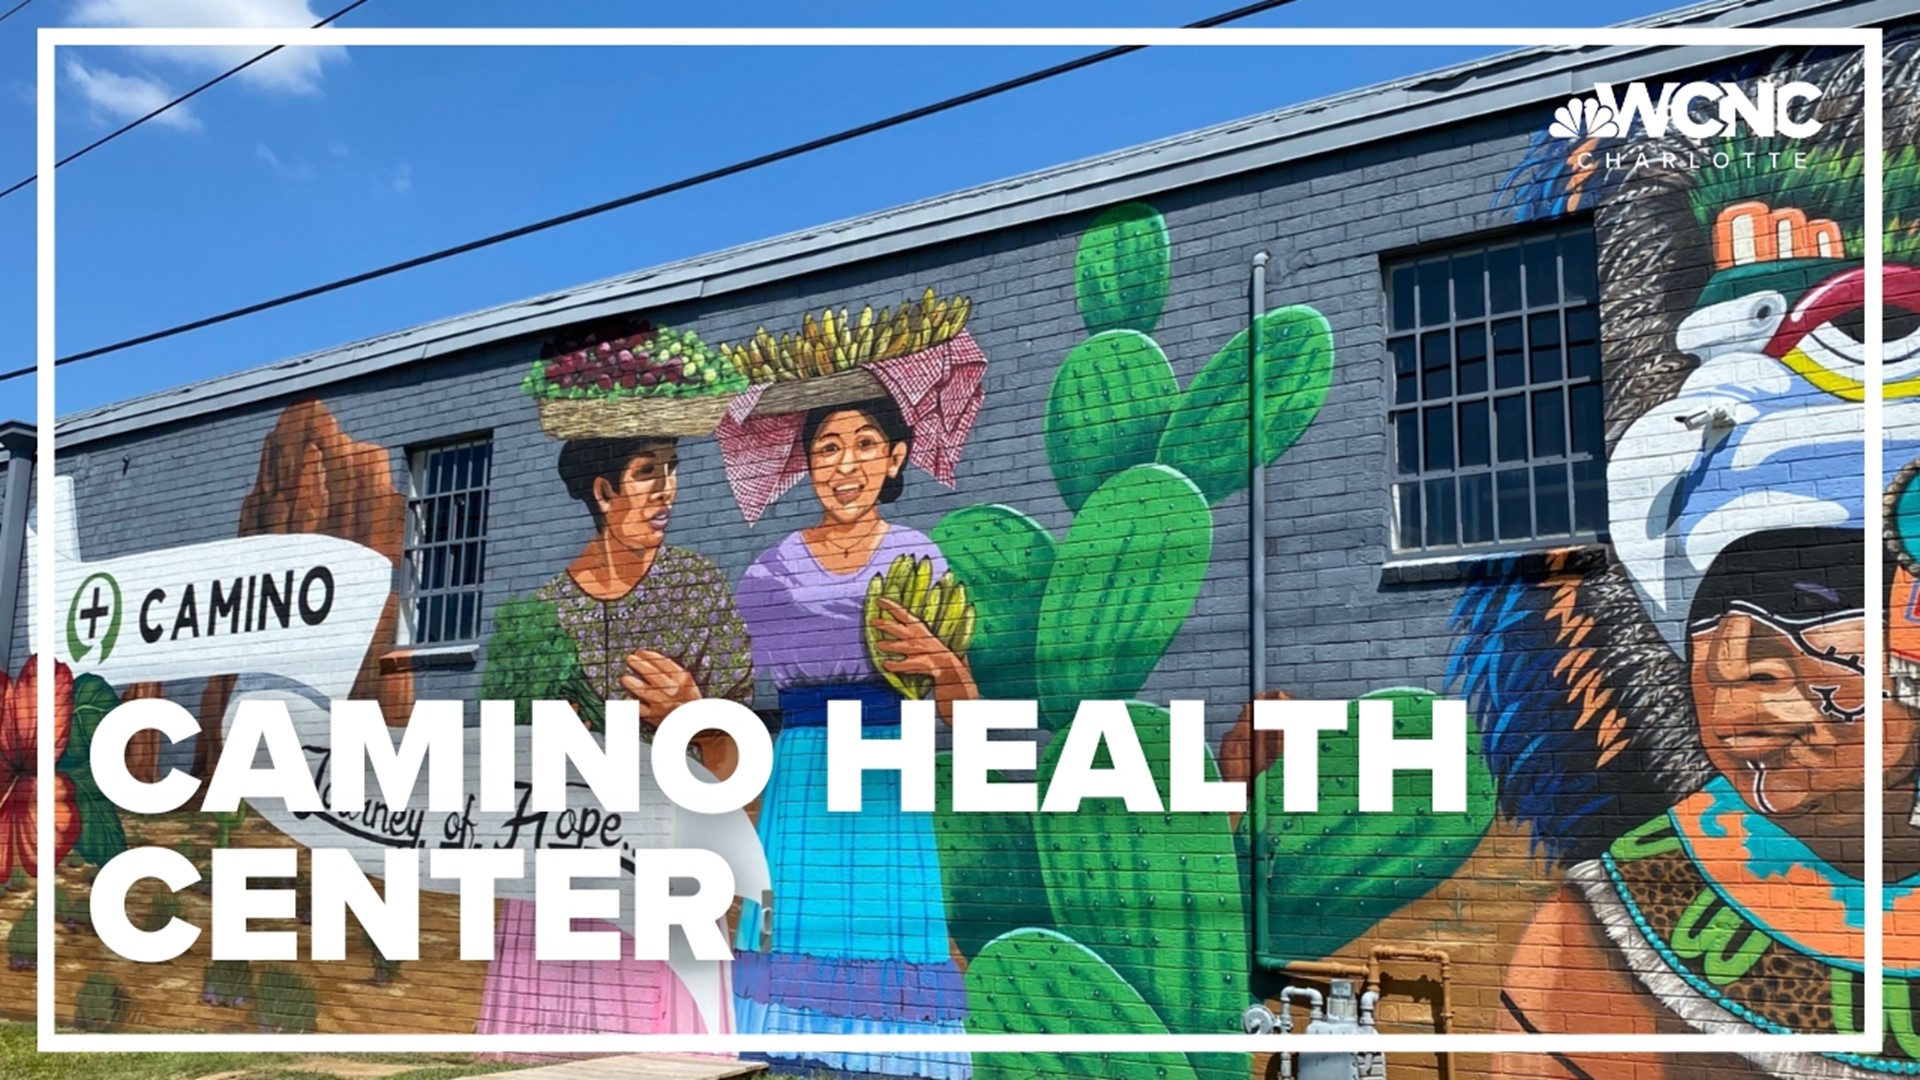 Camino Health Center is a nonprofit focused on equipping all people to live healthy lives.